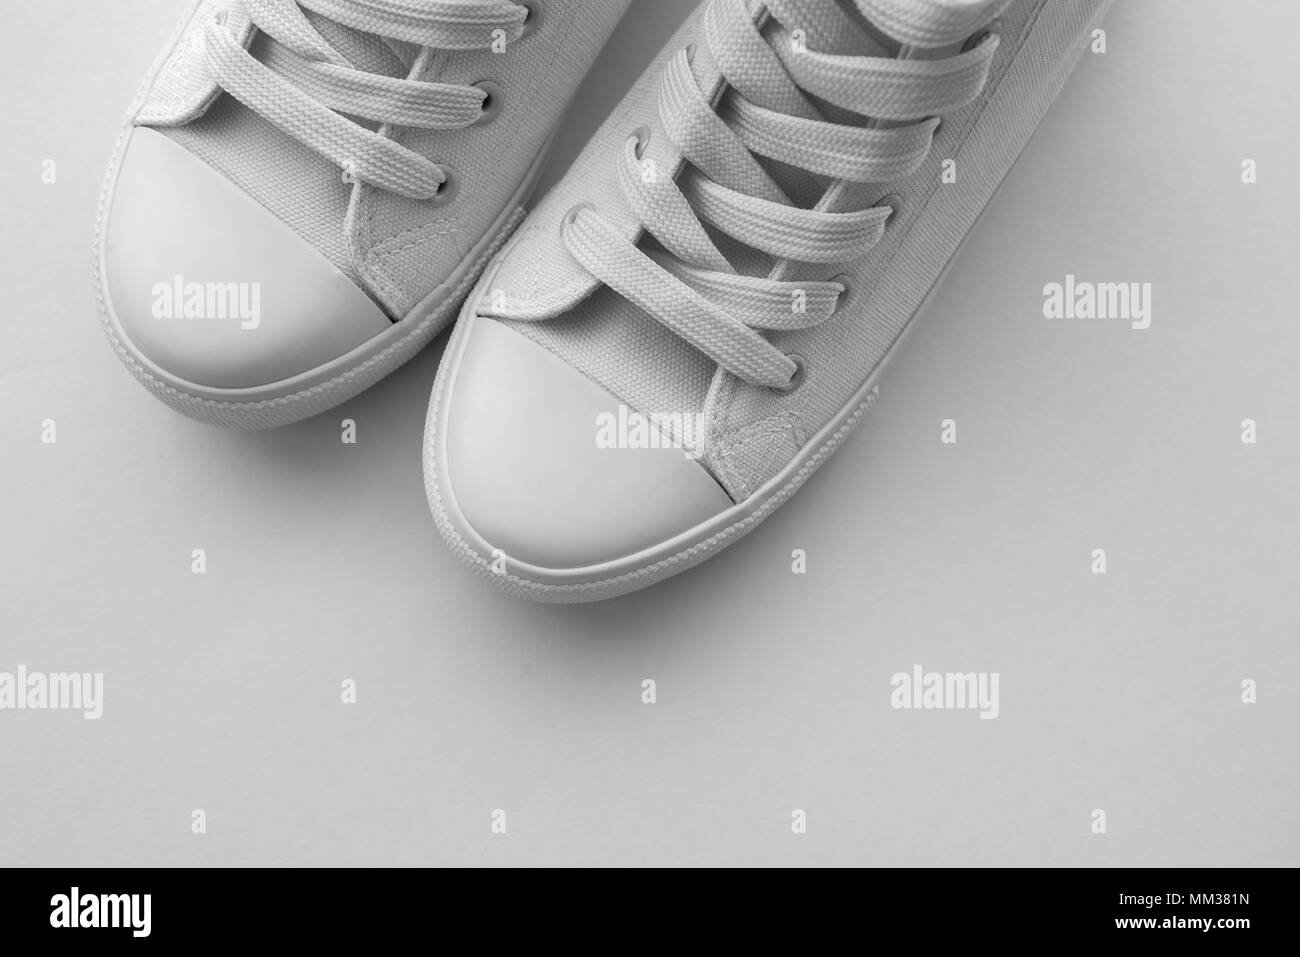 Casual shoes Black and White Stock Photos & Images - Alamy